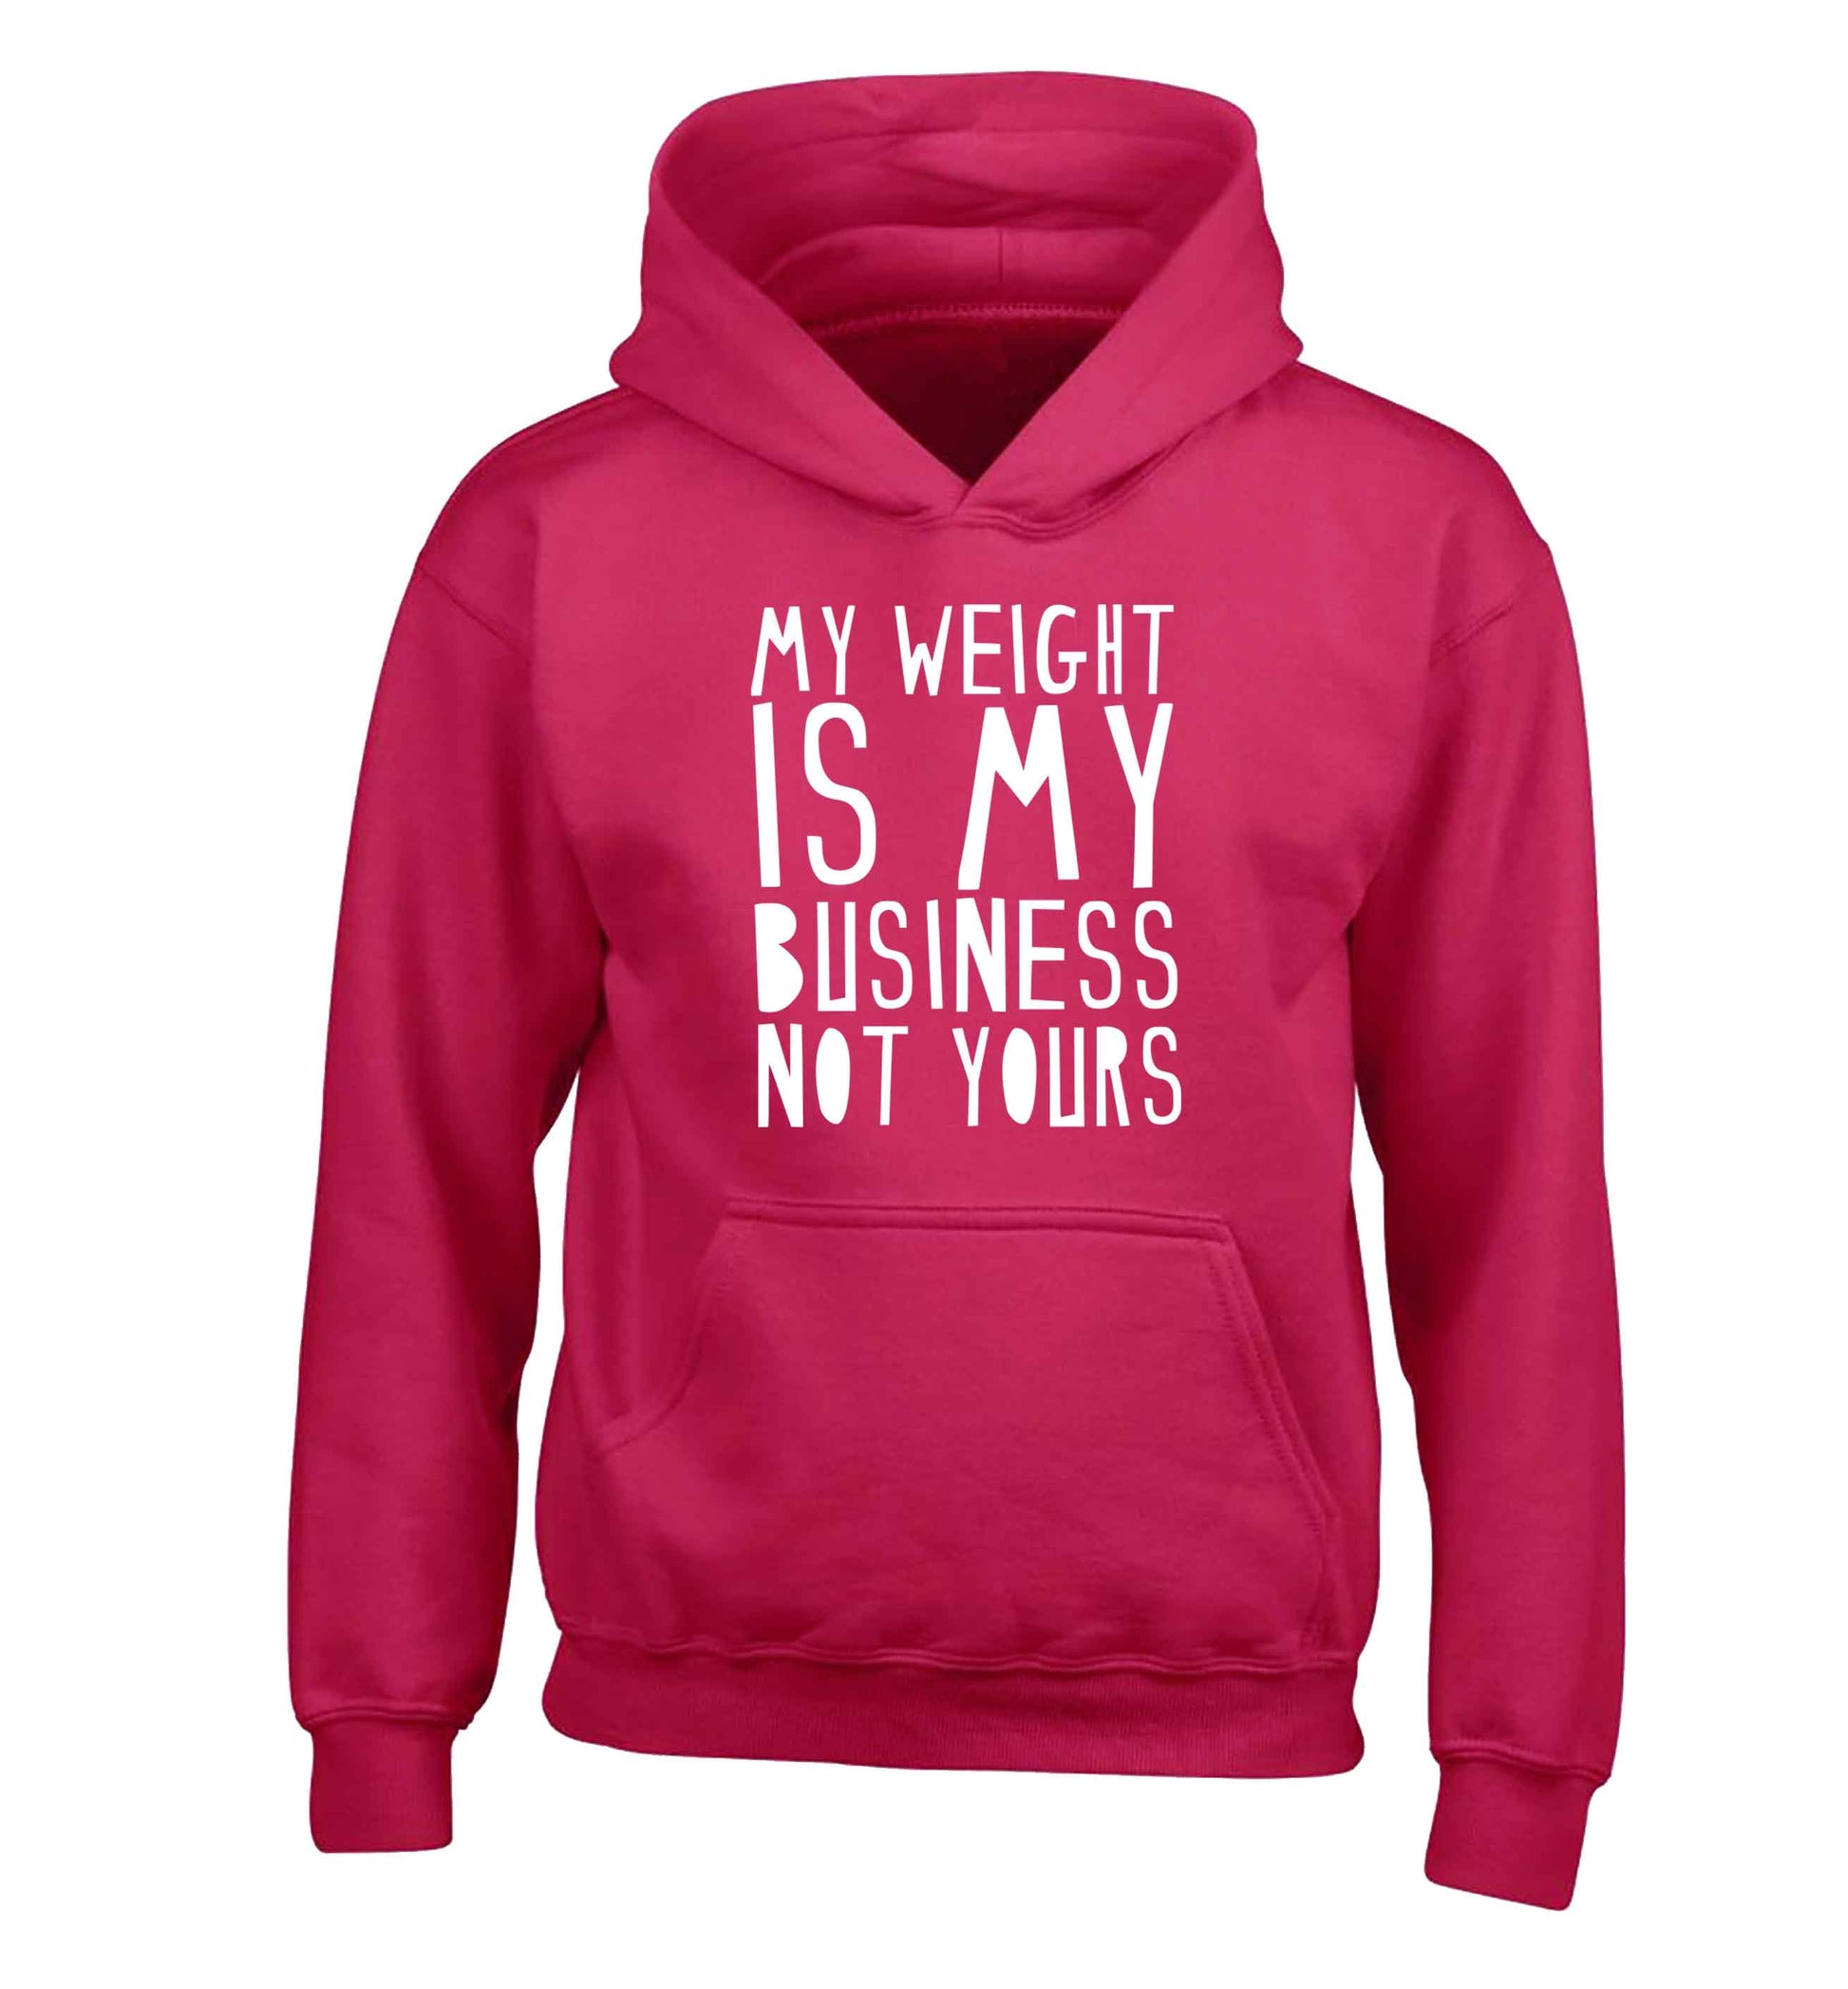 My weight is my business not yours children's pink hoodie 12-13 Years